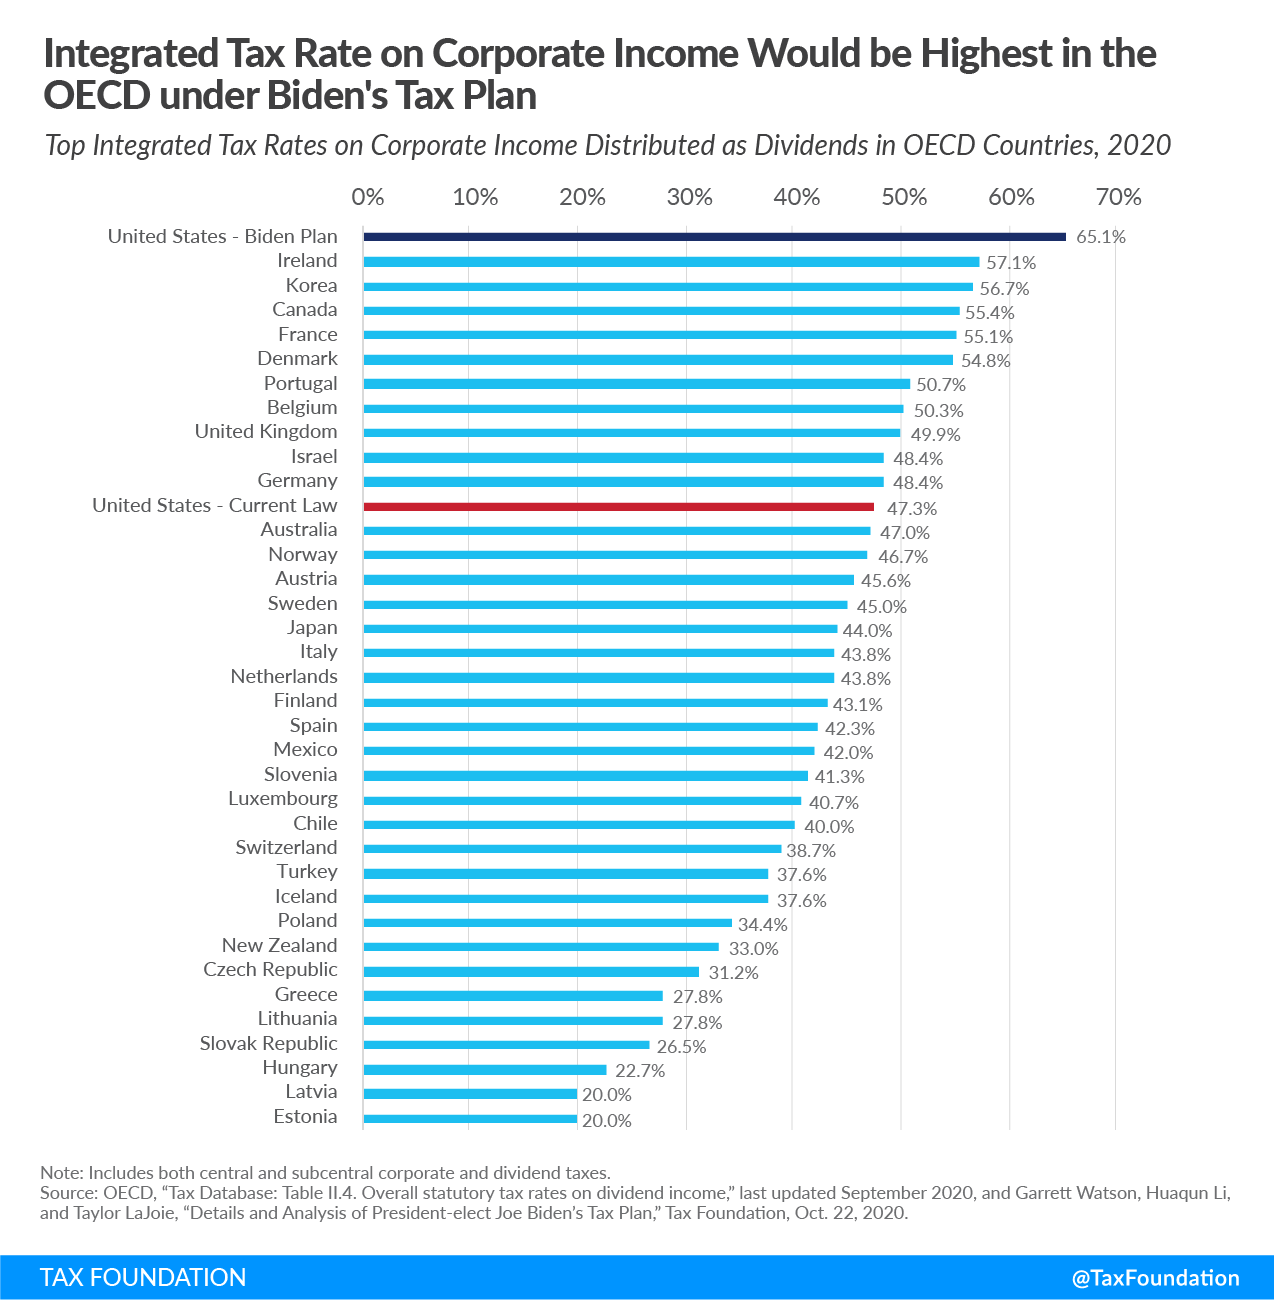 Integrated tax rate on corporate income would be highest in the OECD under Biden Tax Plan